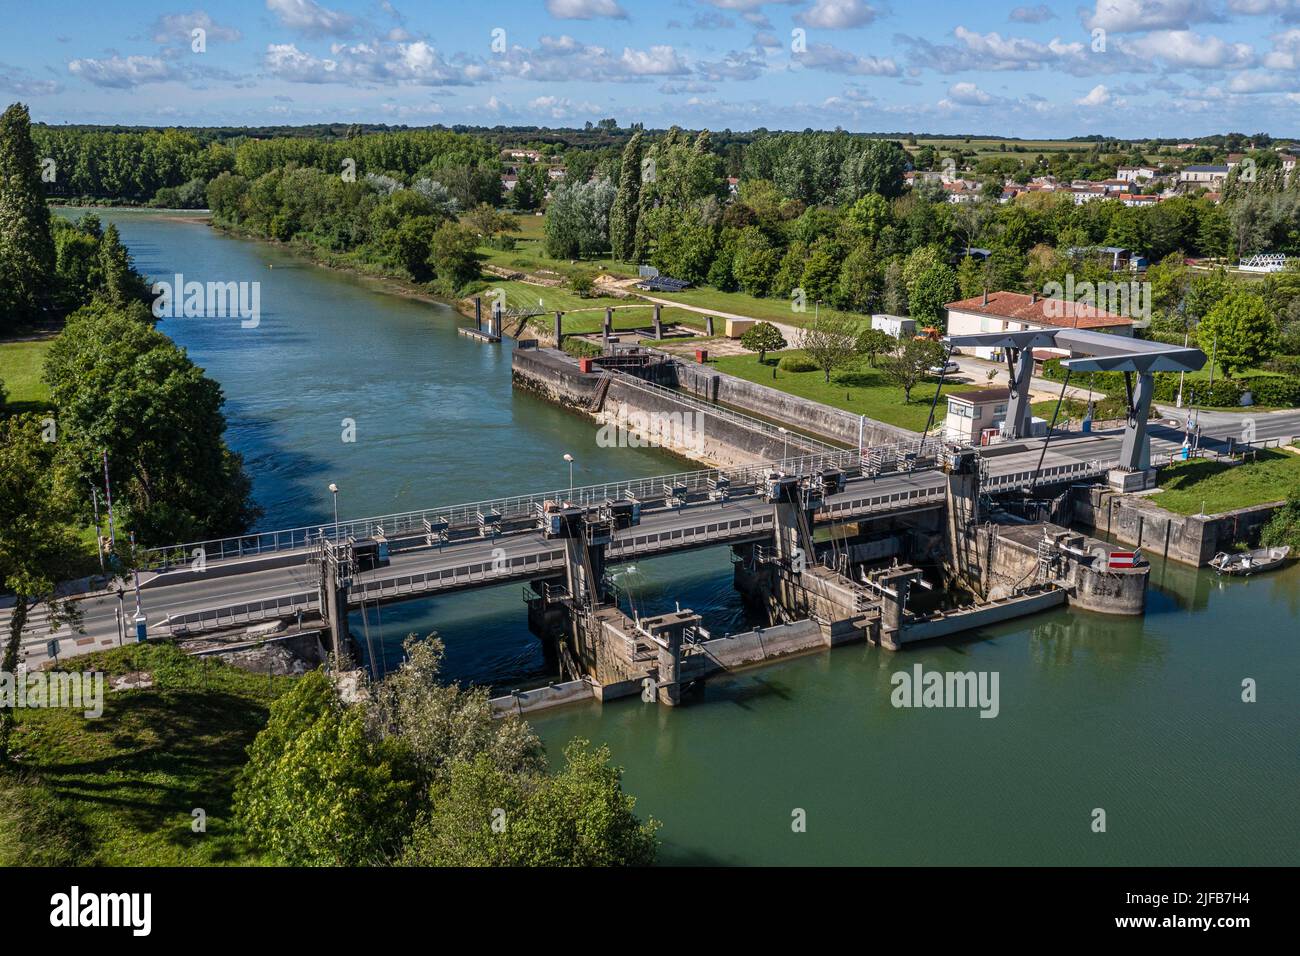 France, Charente-Maritime, Saintonge, Saint-Savinien, dam which promotes the flow of the Charente during flood periods and stops the salinity brought by the tides (aerial view) Stock Photo